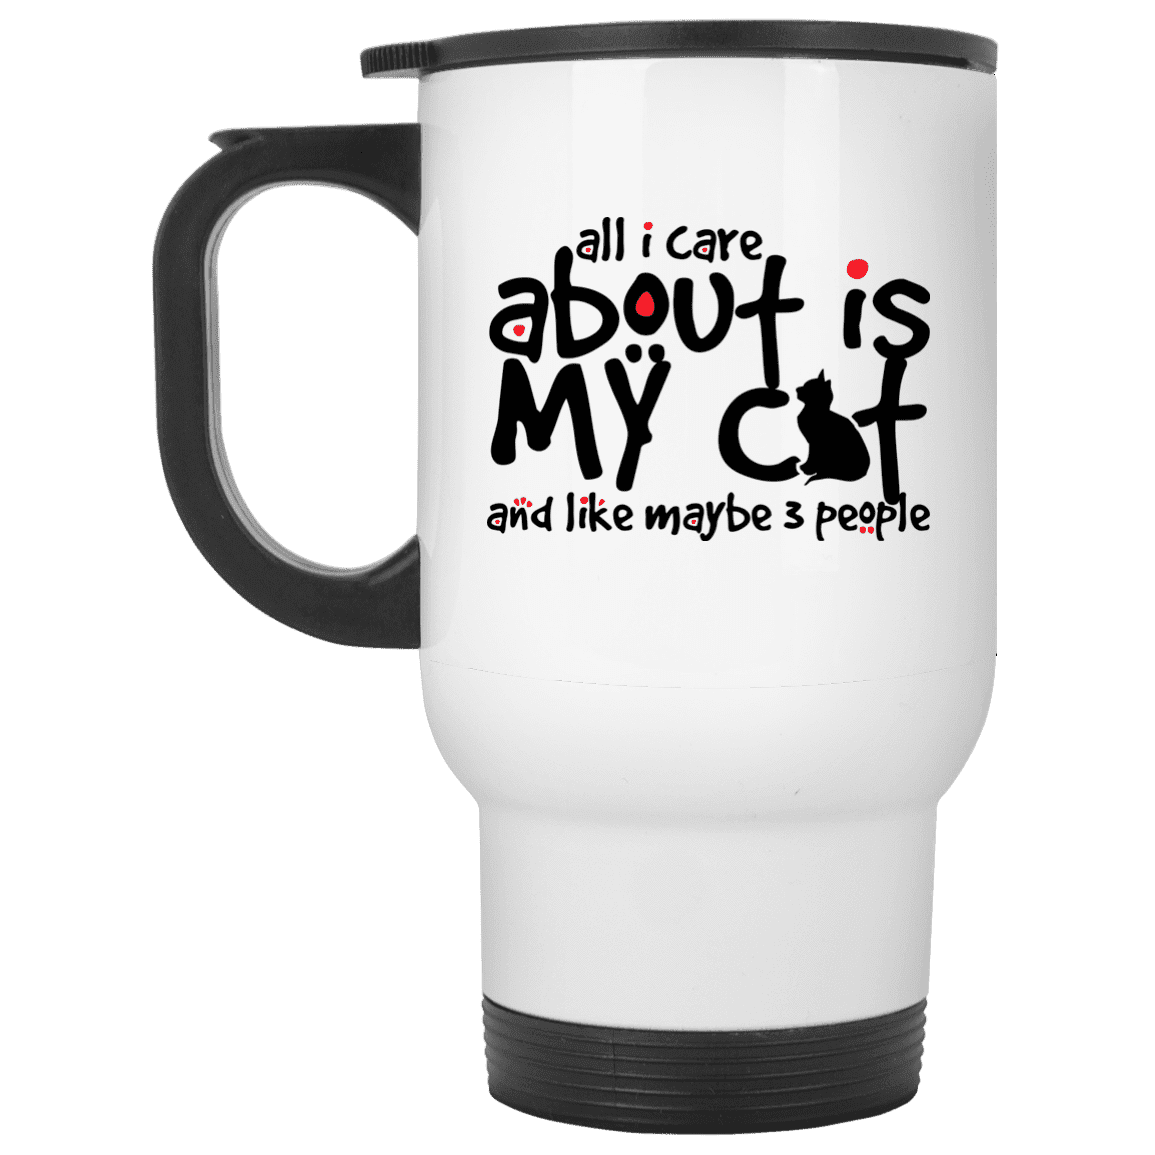 All I Care About Is My Cat - Mugs.